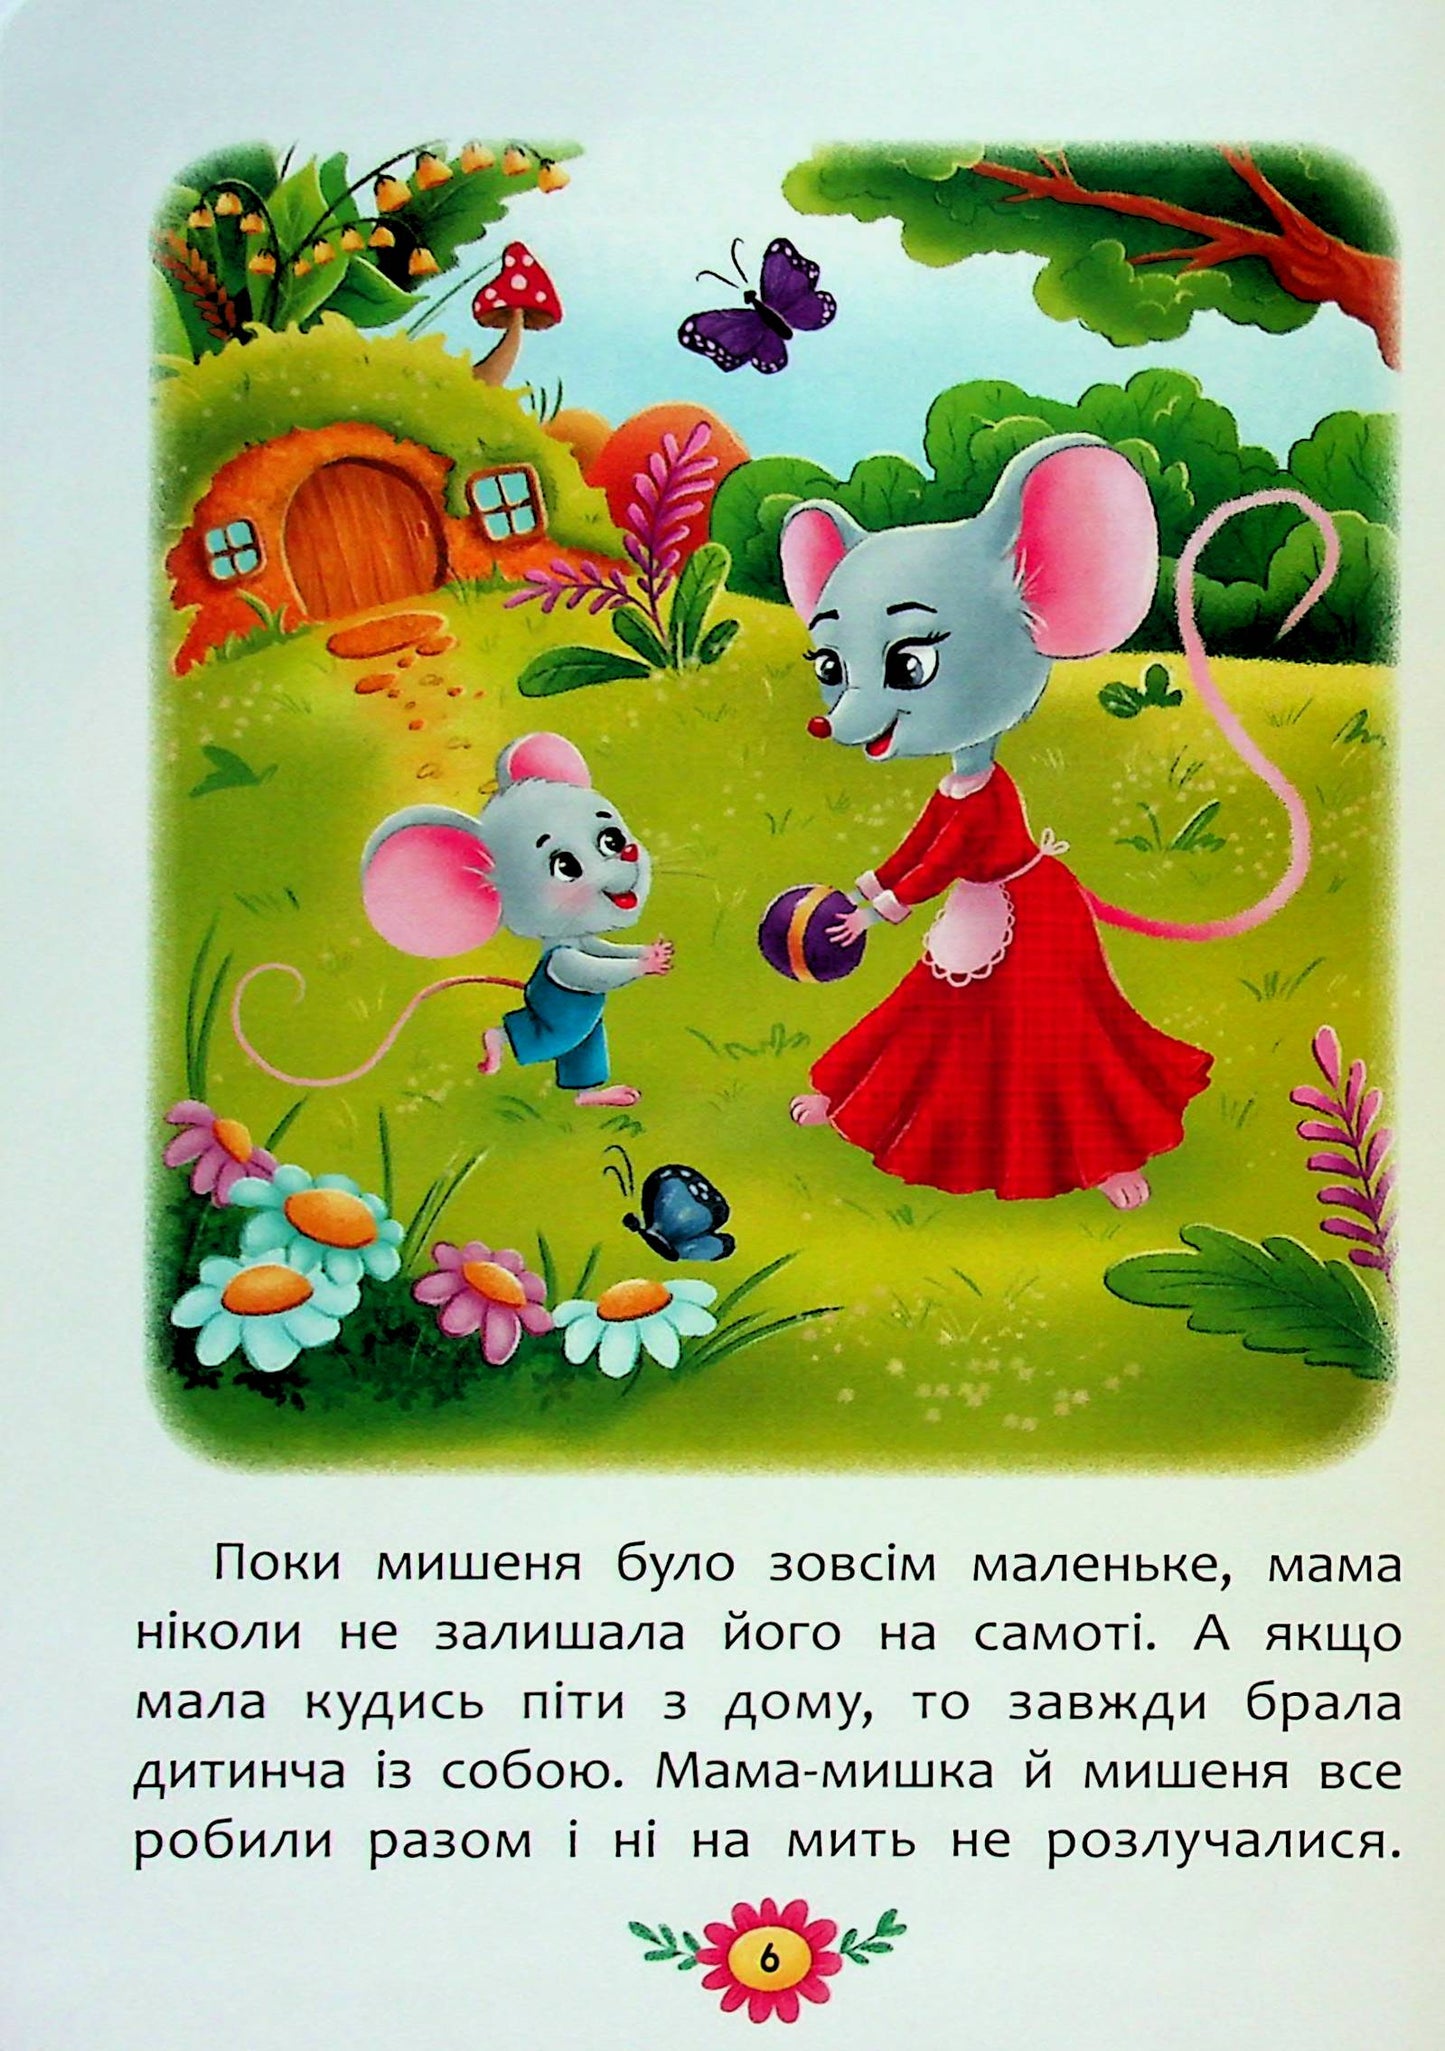 Educational fairy tales. Everything that is important for children to know / Виховальні казки. Усе, що важливо знати дітям  978-617-547-490-7-5